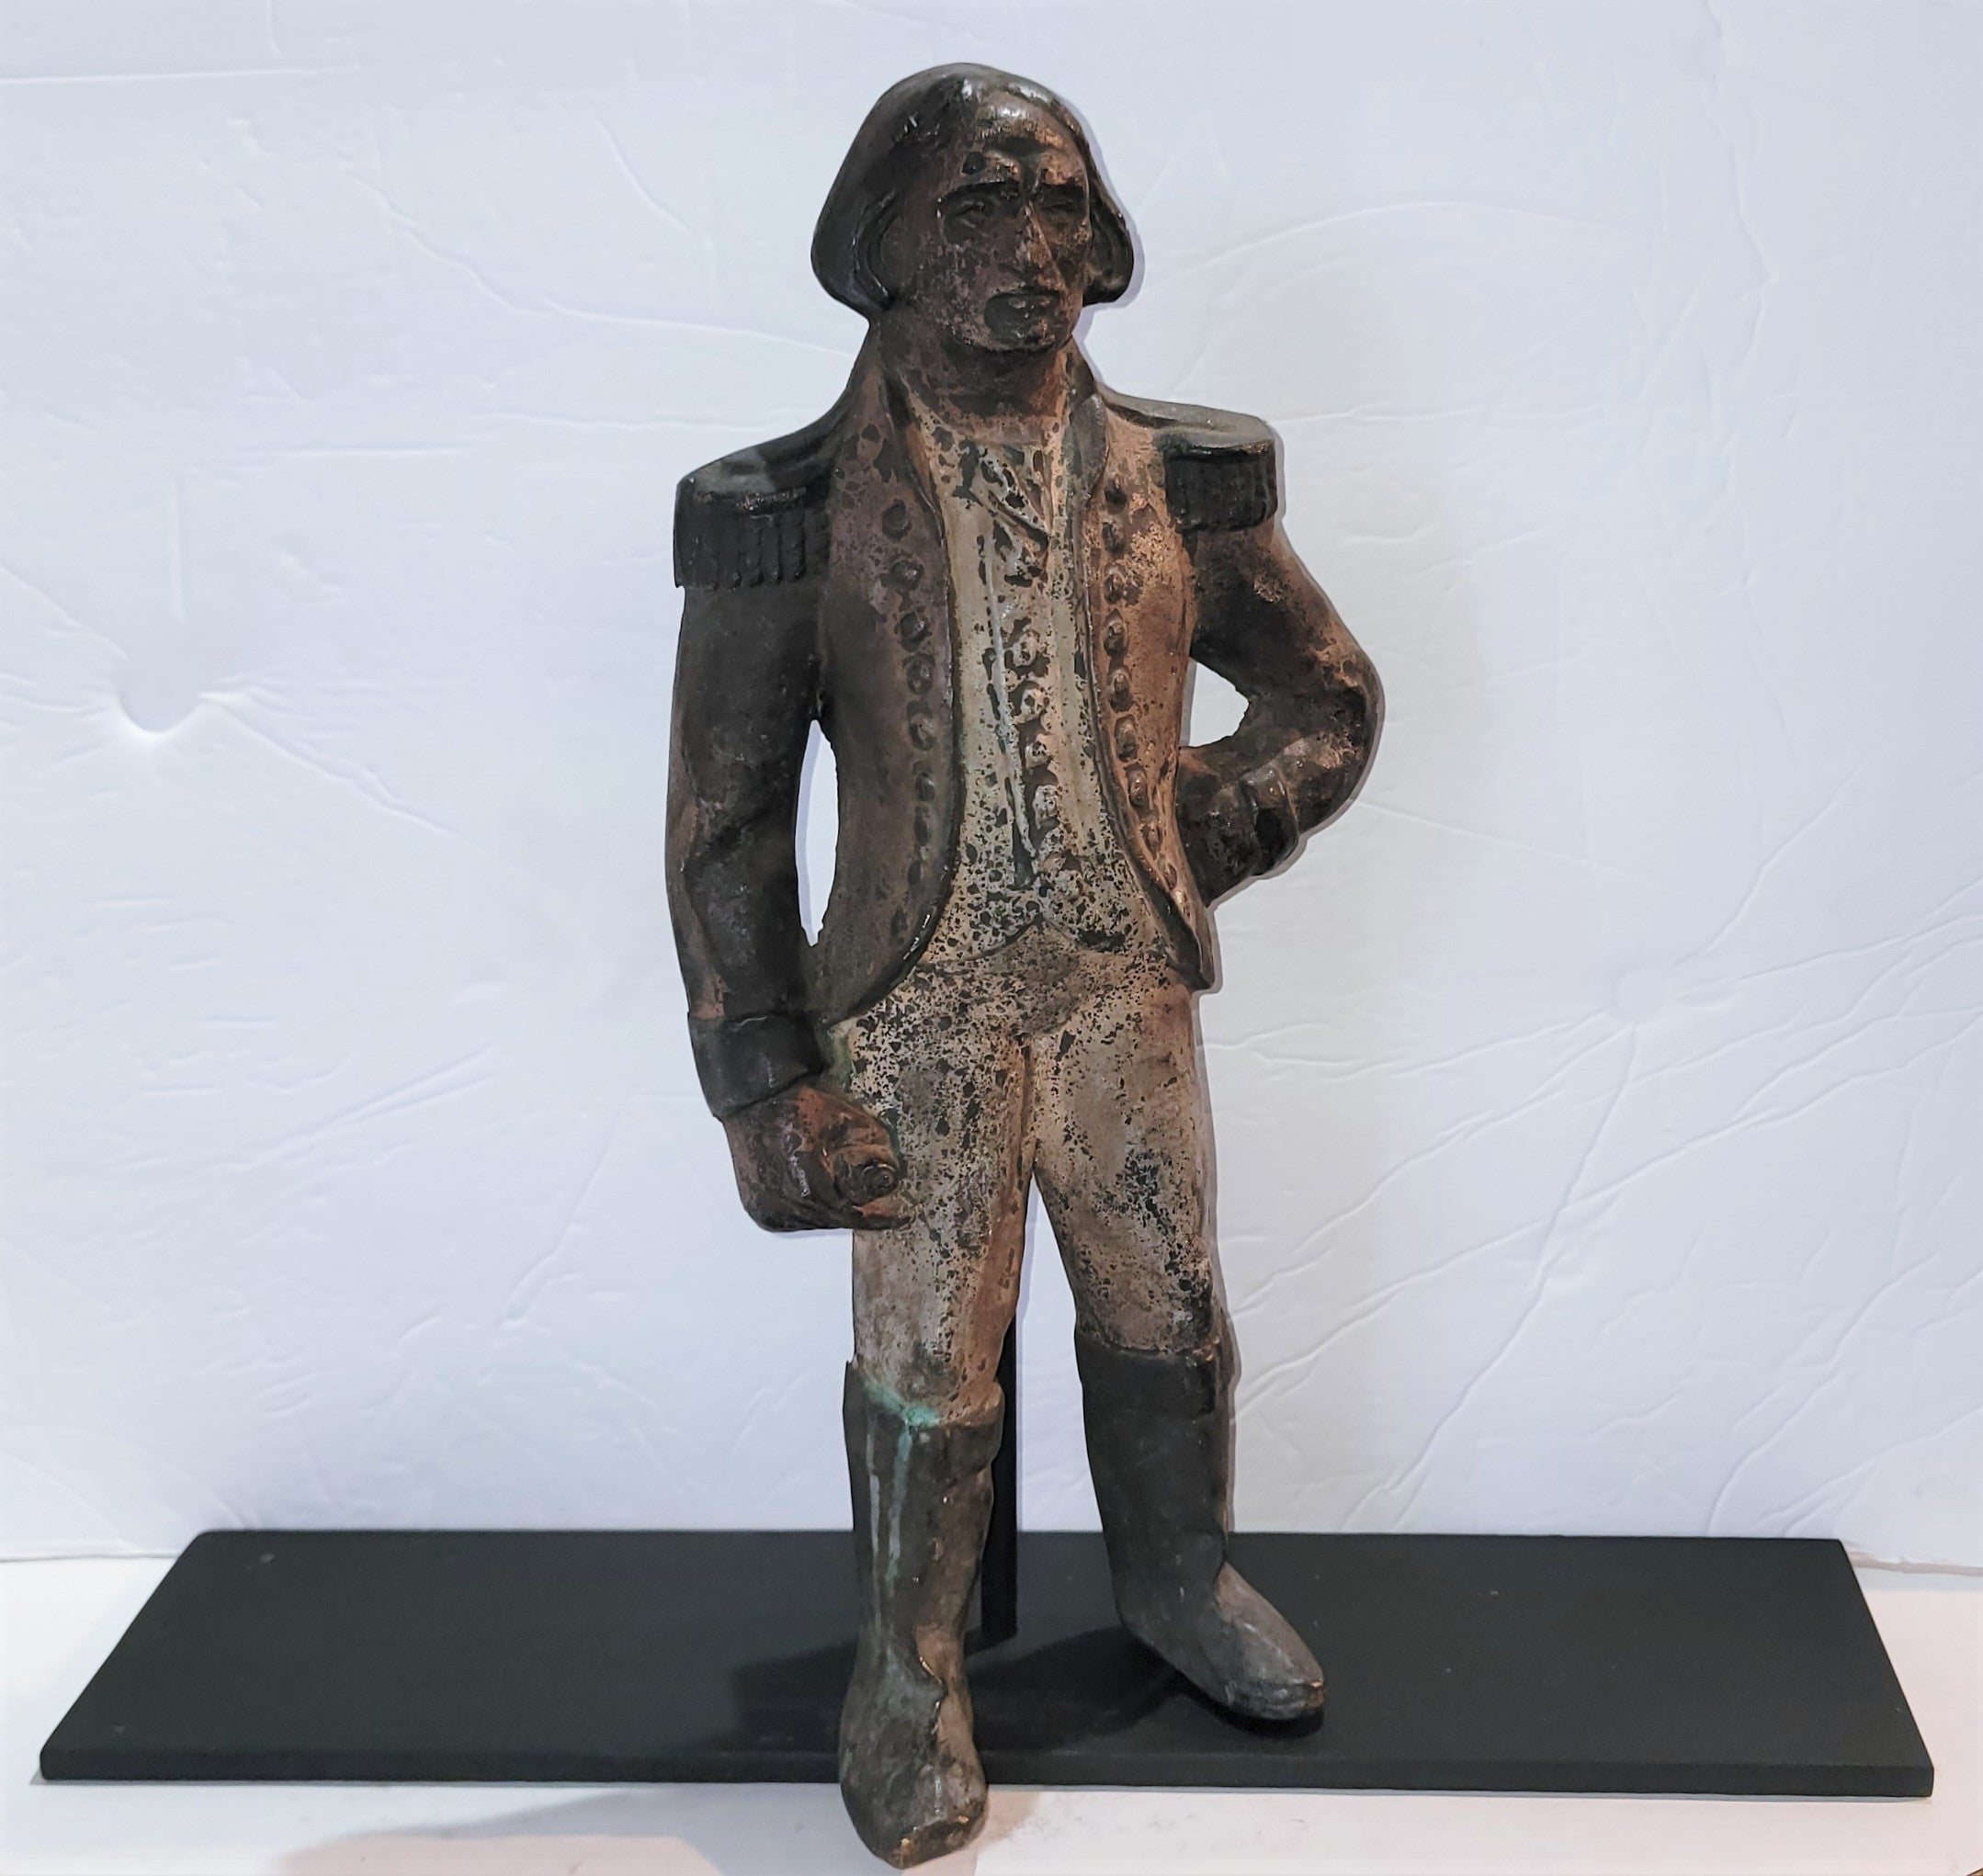 19th century Original painted George Washington cast iron mounted andiron or doorstop. This is a custom made cast iron mount.